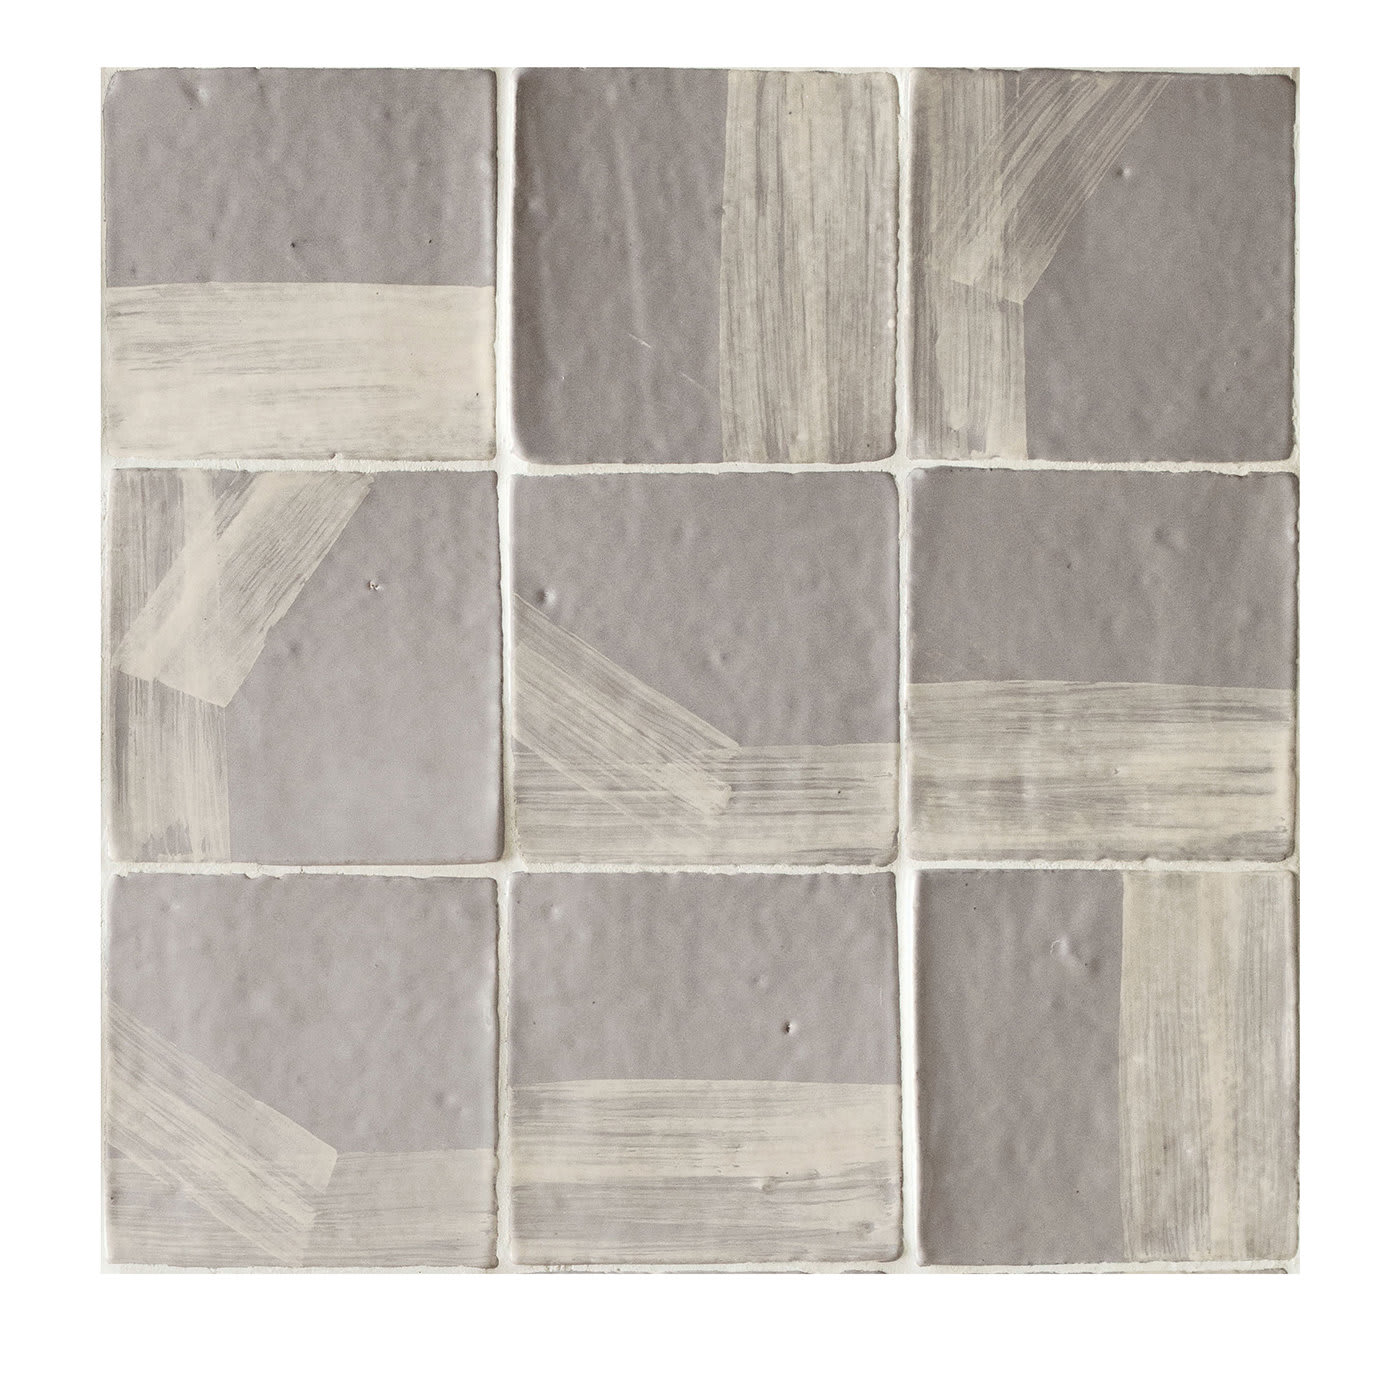 Tracce Set of 44 Gray Tiles by Margherita Rui - Ninefifty